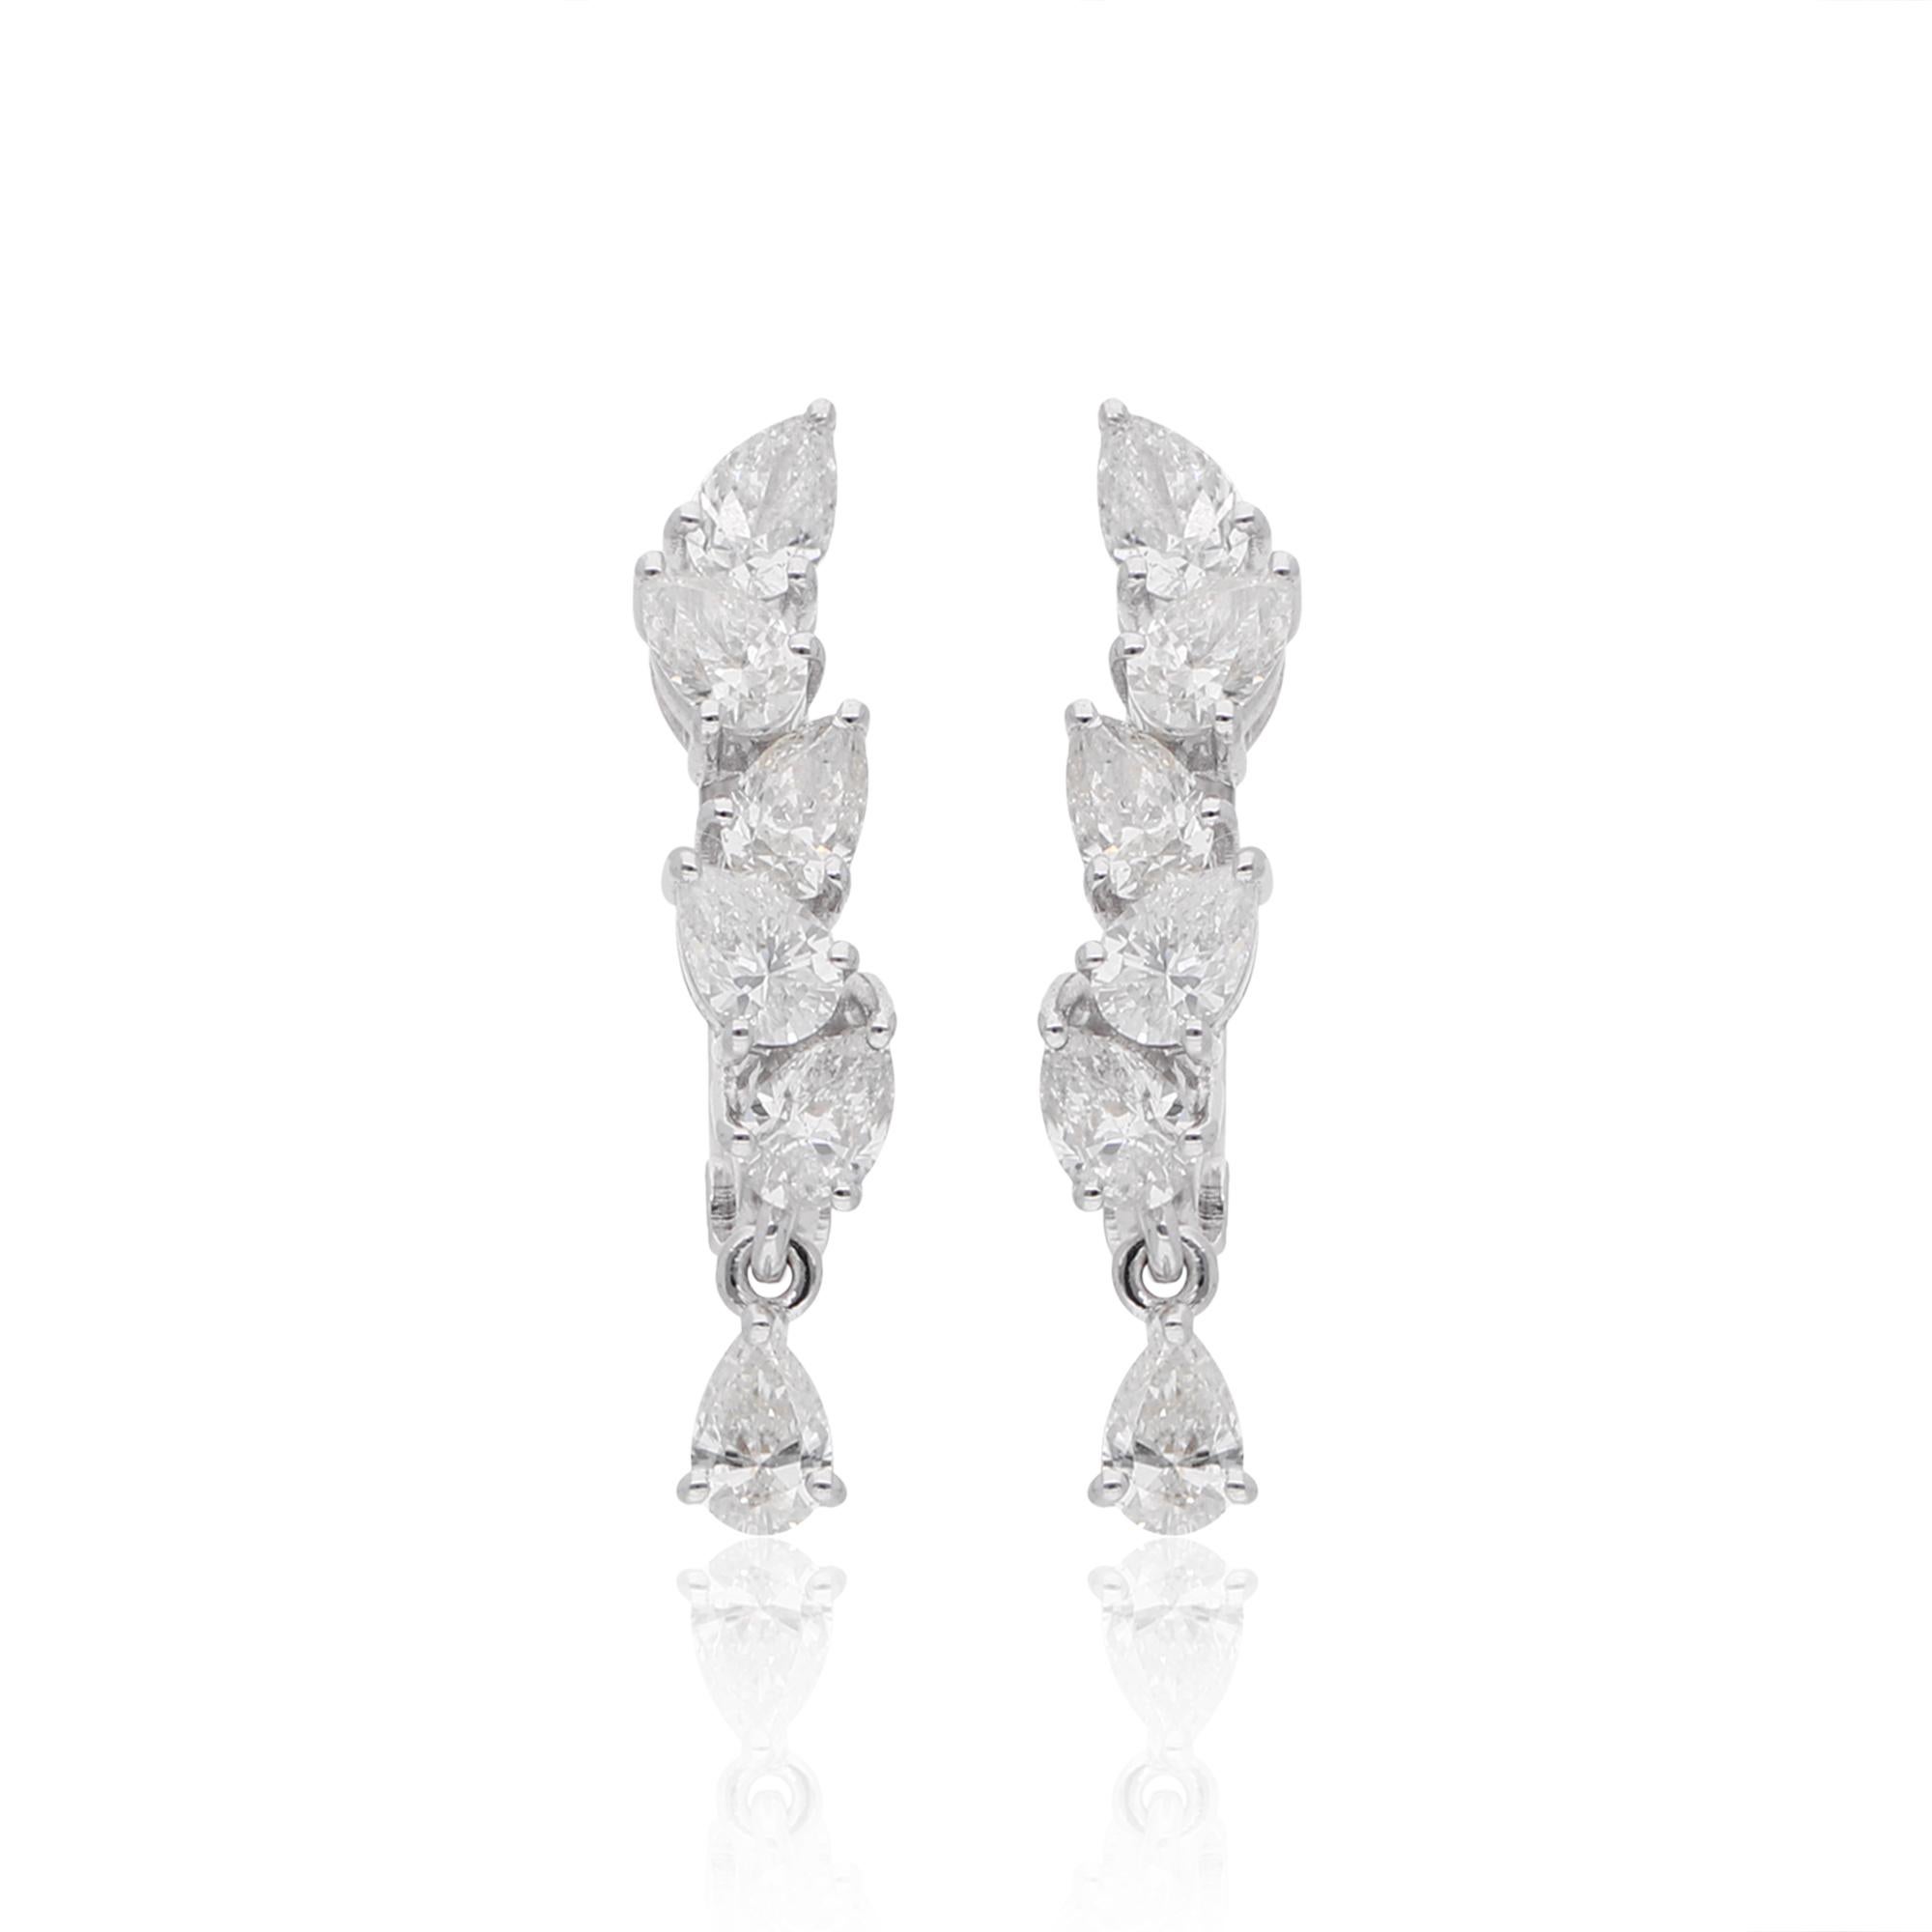 Step into the realm of timeless elegance with these breathtaking 1 Carat Pear Shape Diamond Hoop Earrings, meticulously handcrafted in luxurious 14 Karat White Gold. This exquisite pair of handmade jewelry is a radiant celebration of sophistication